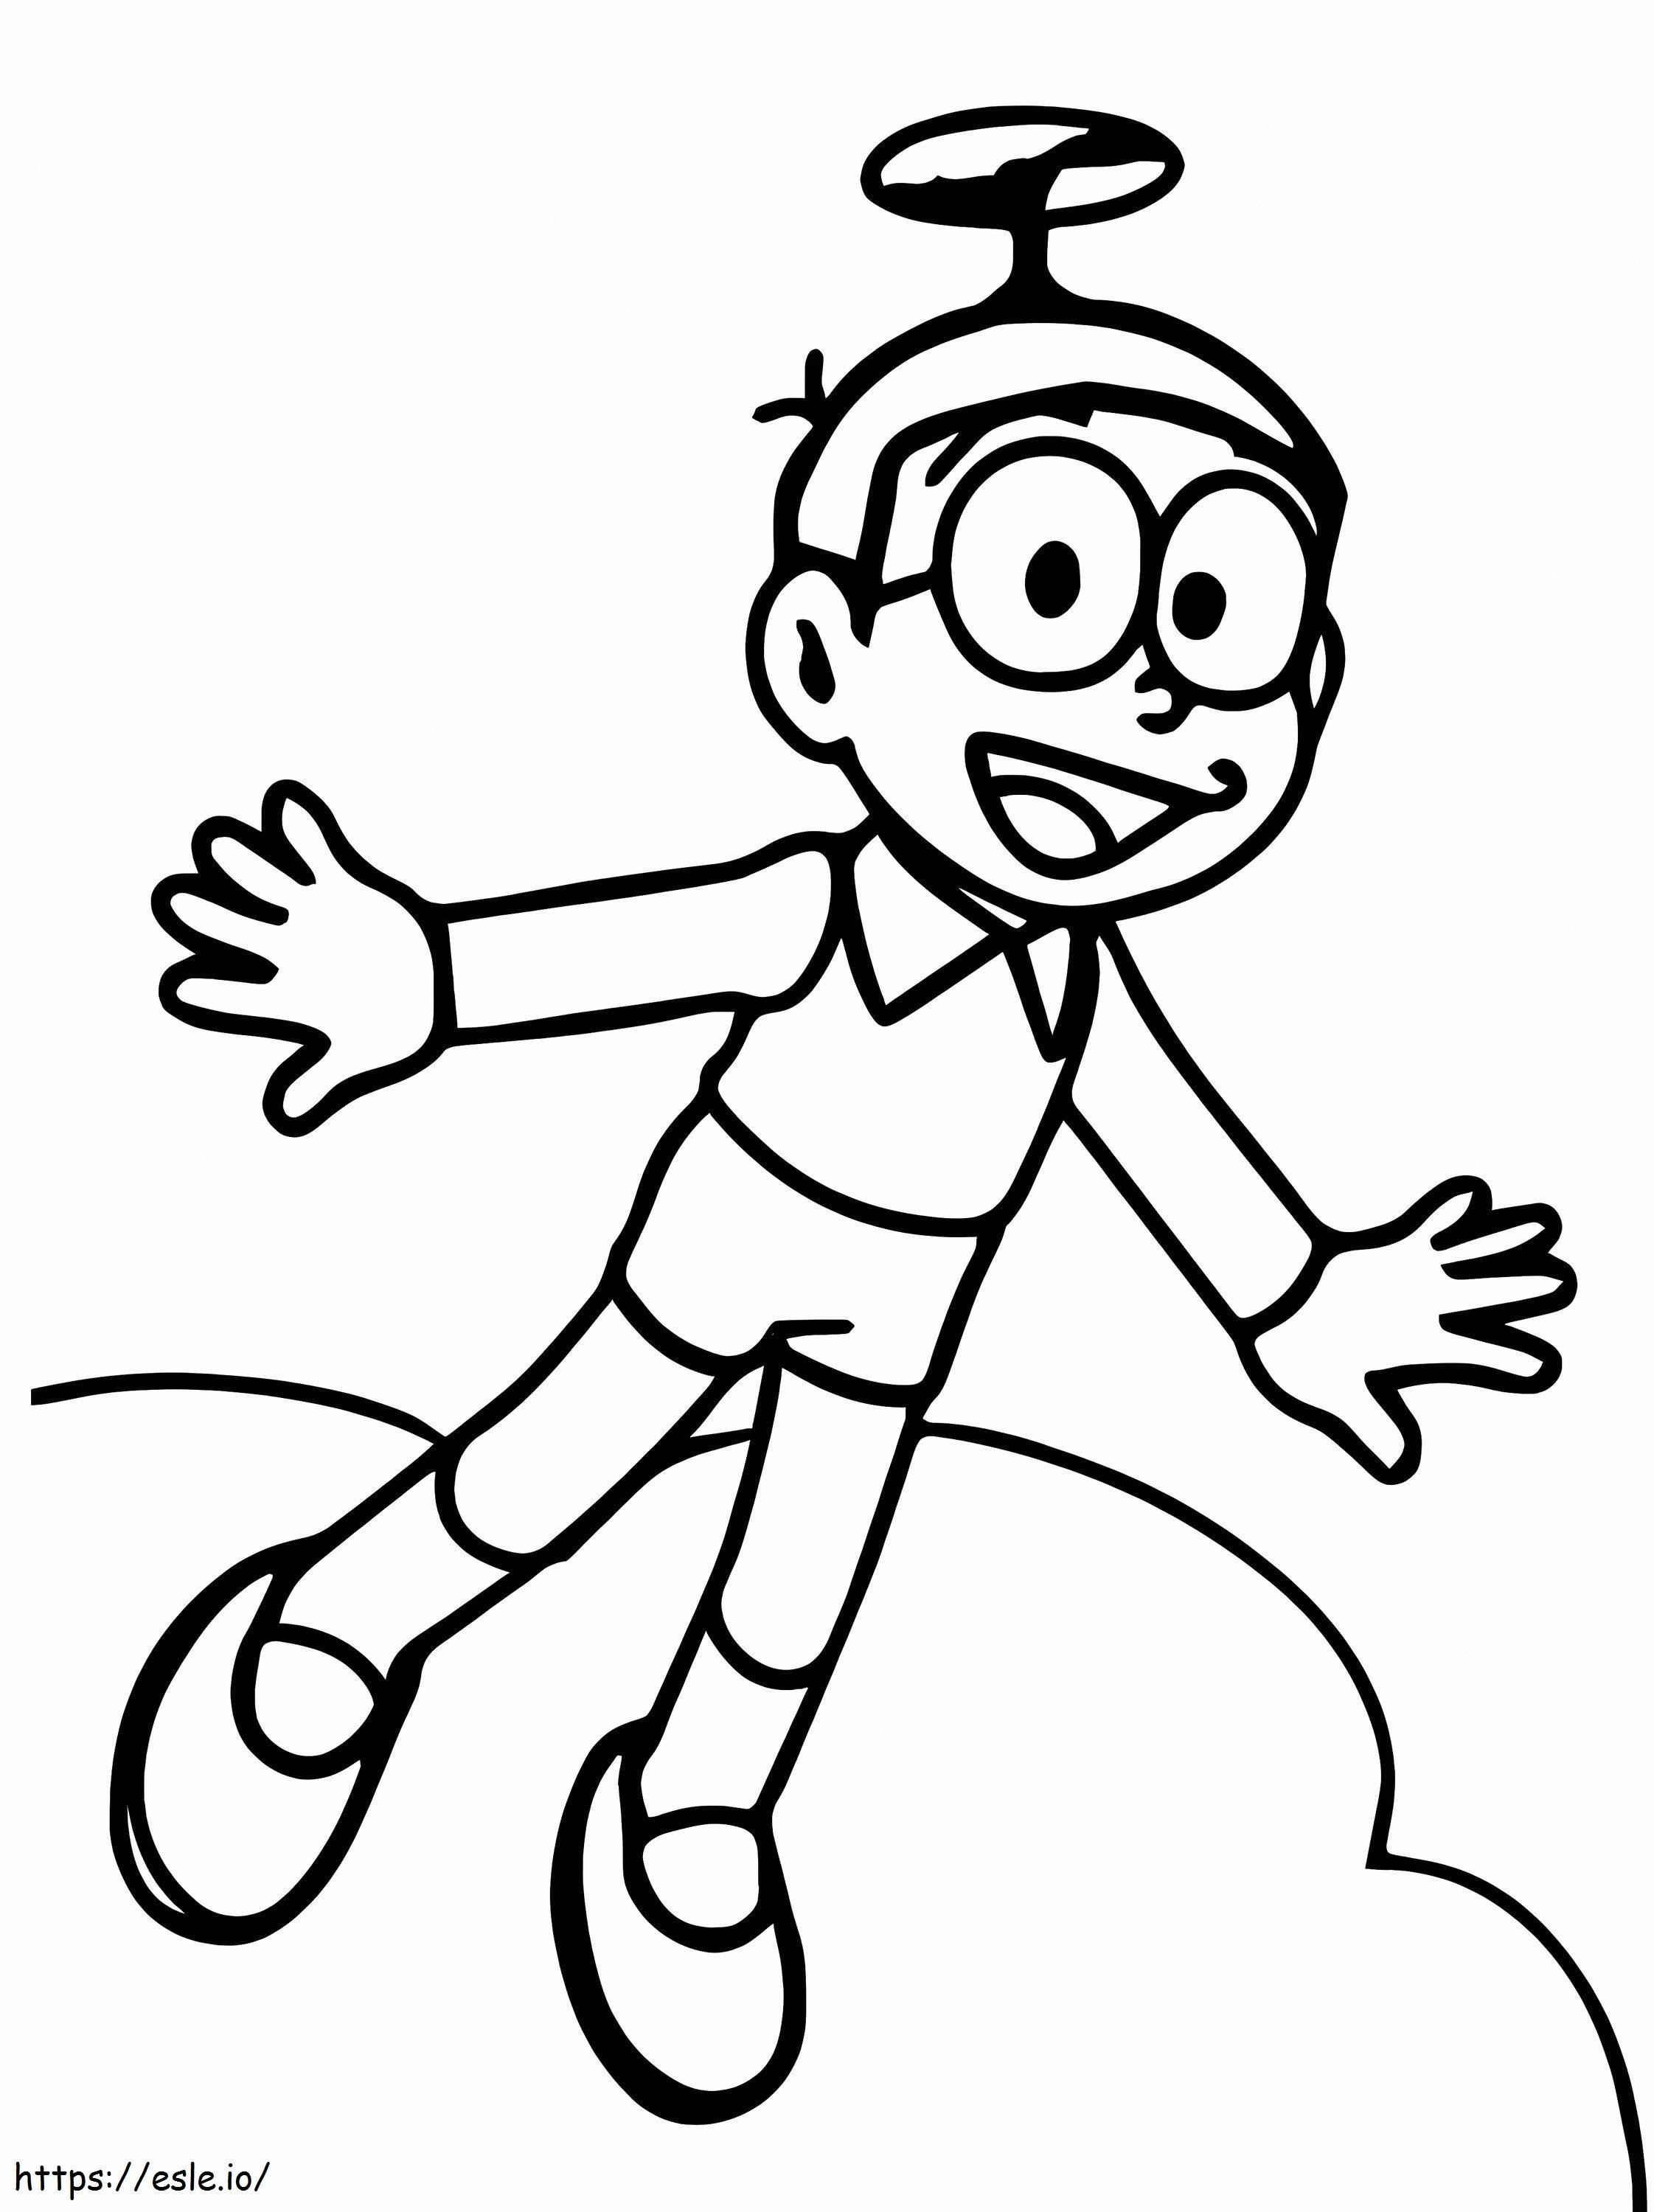 Nobita Flying coloring page